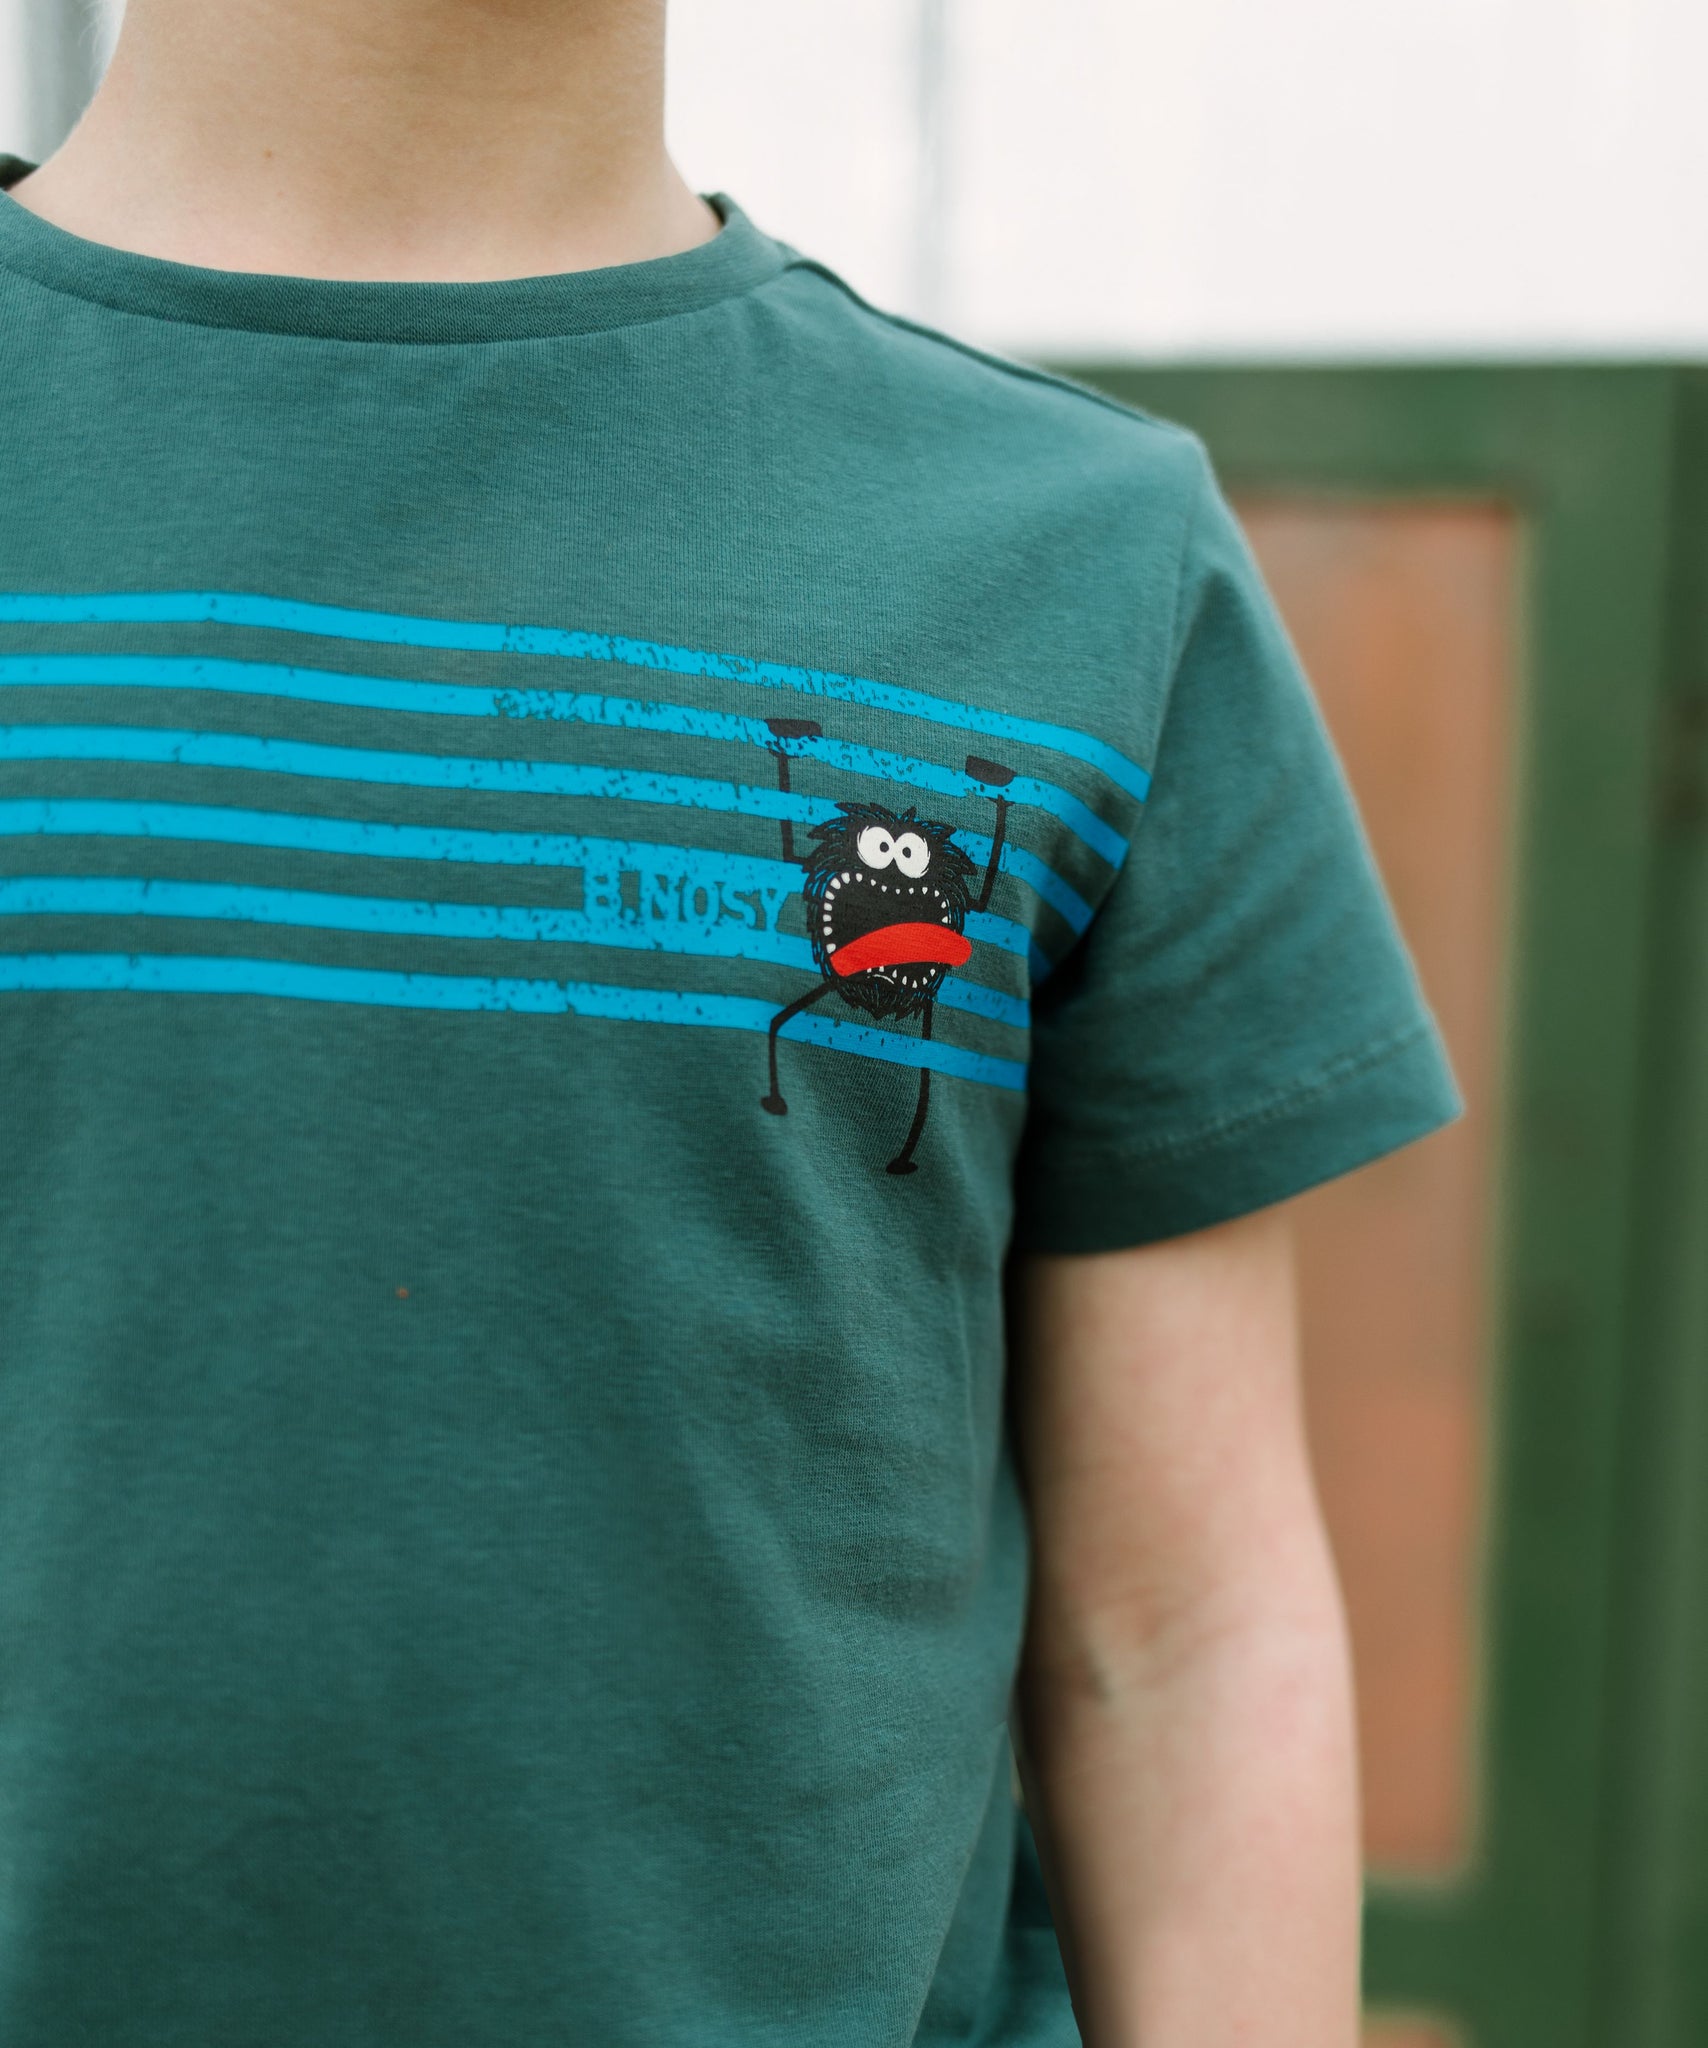 Roger Boys t-shirt with groen